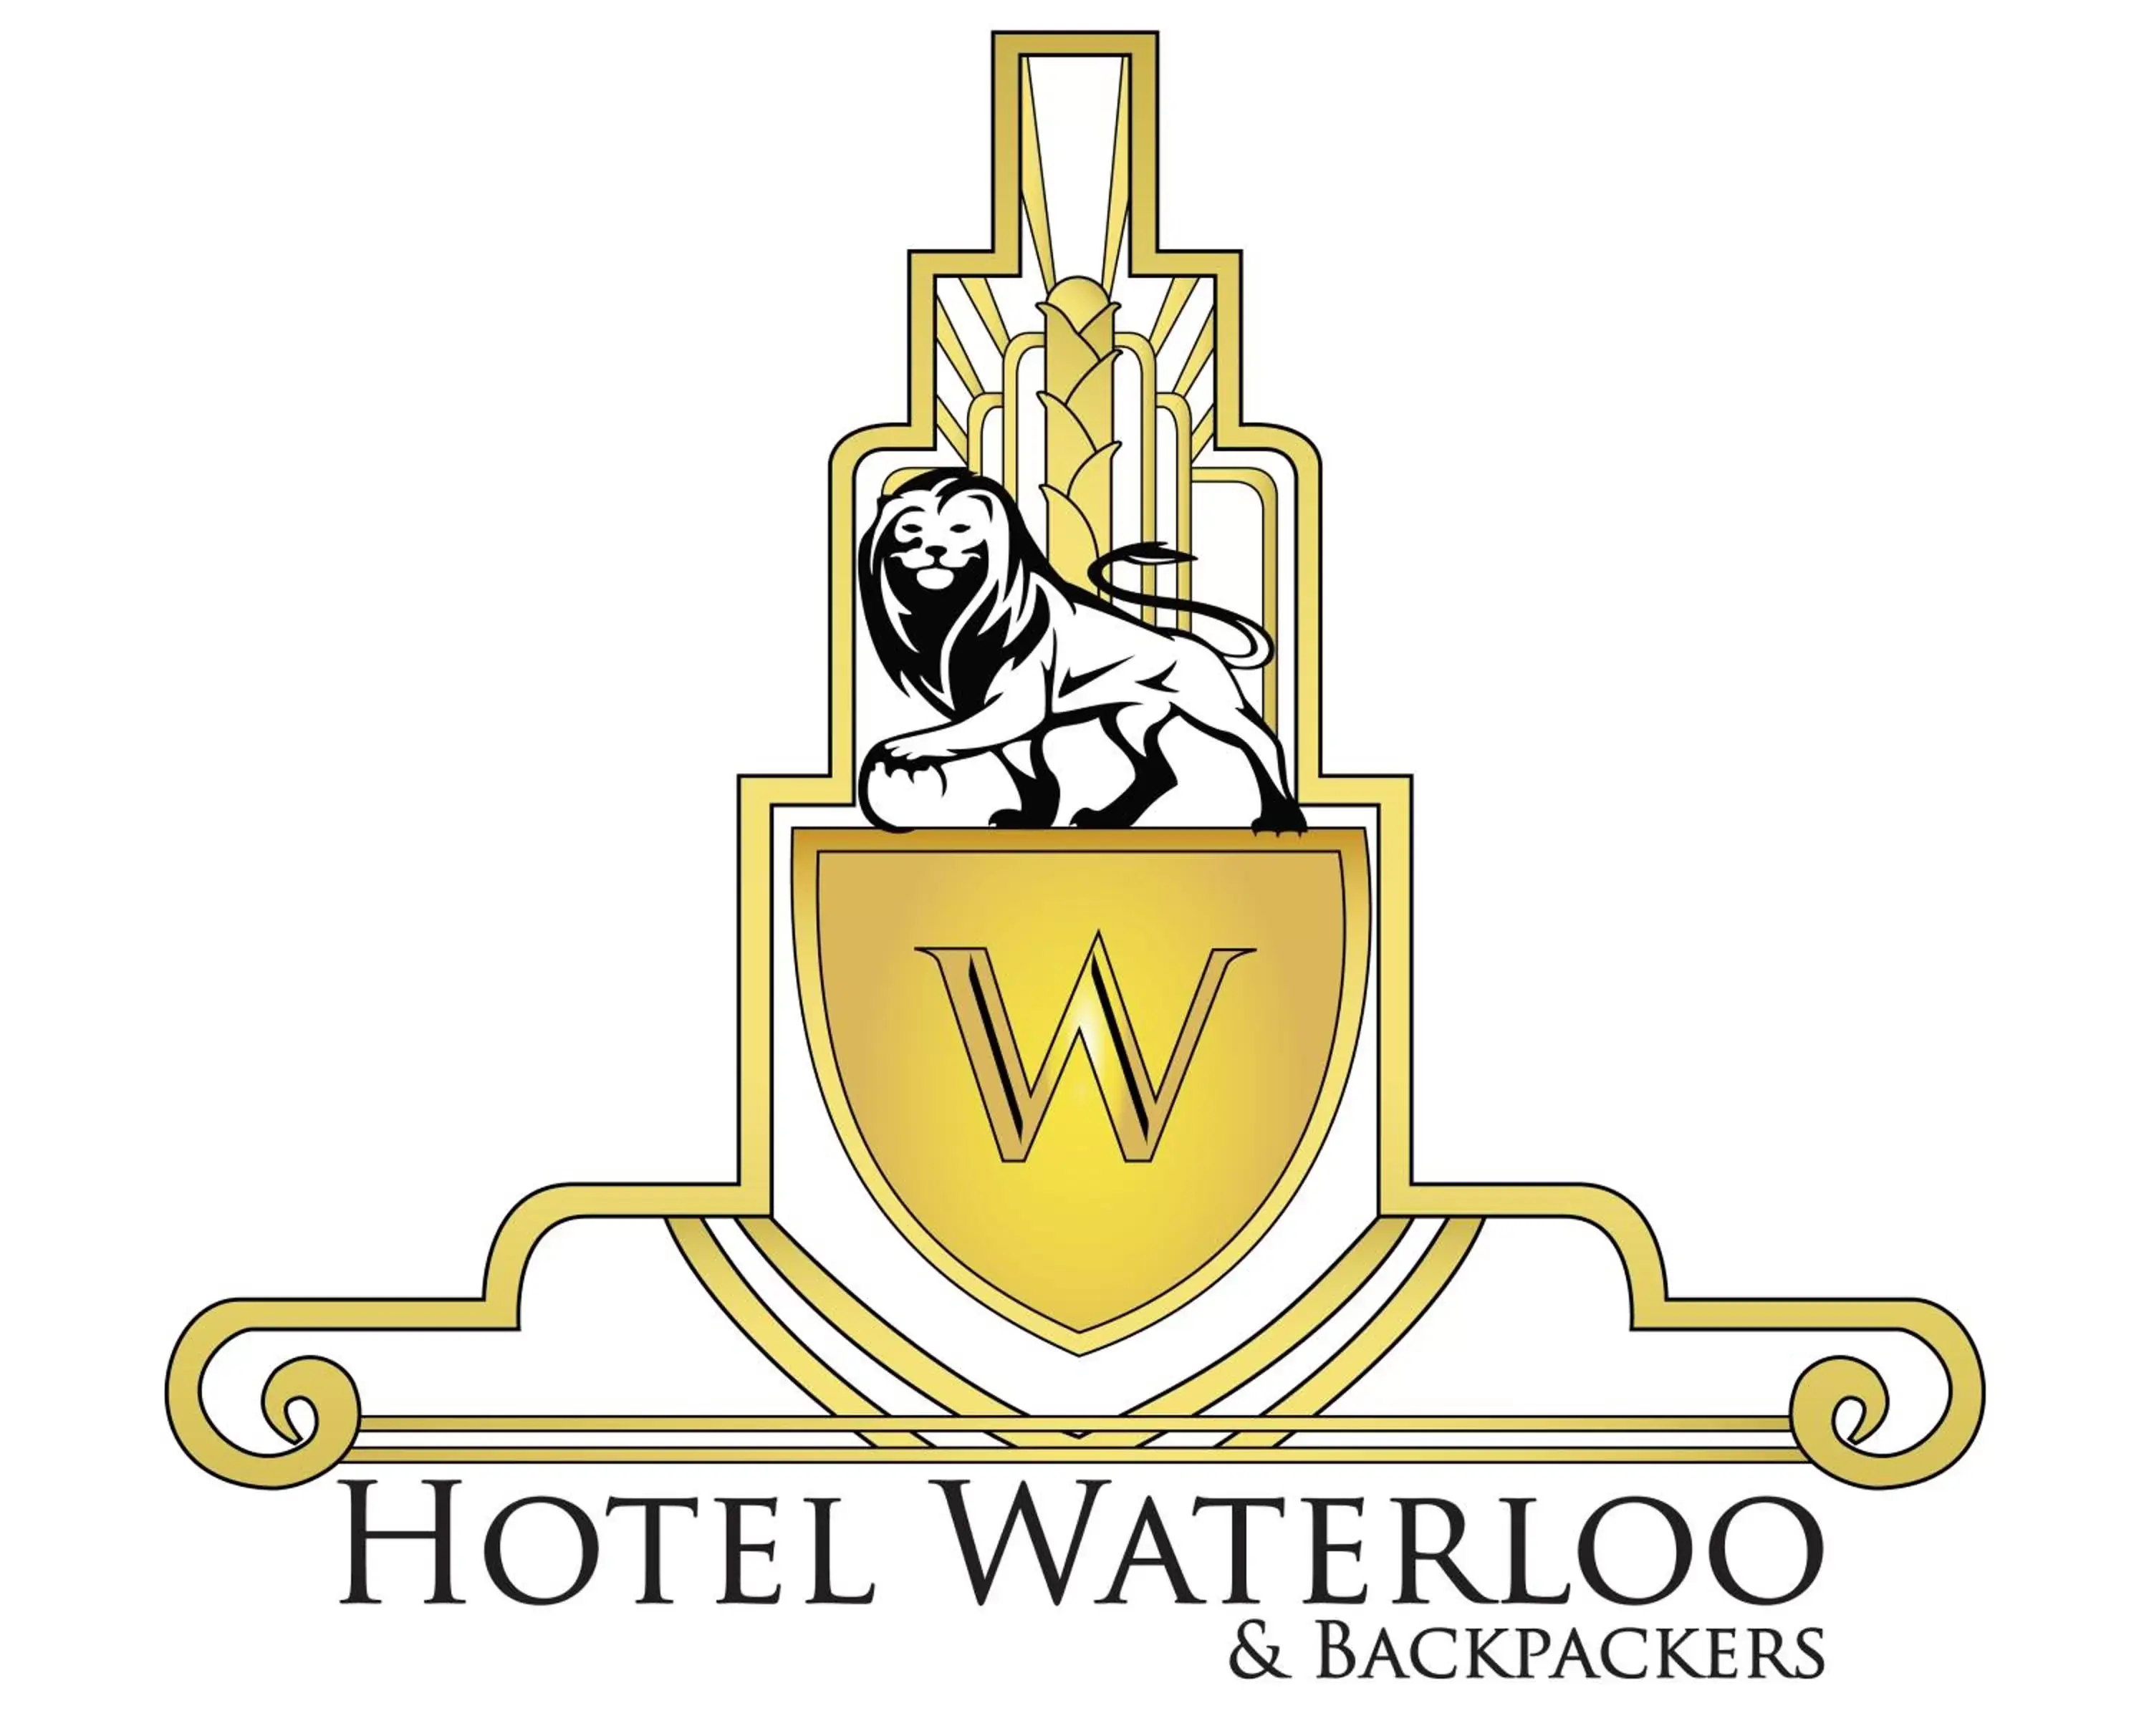 Property logo or sign, Property Logo/Sign in Hotel Waterloo & Backpackers